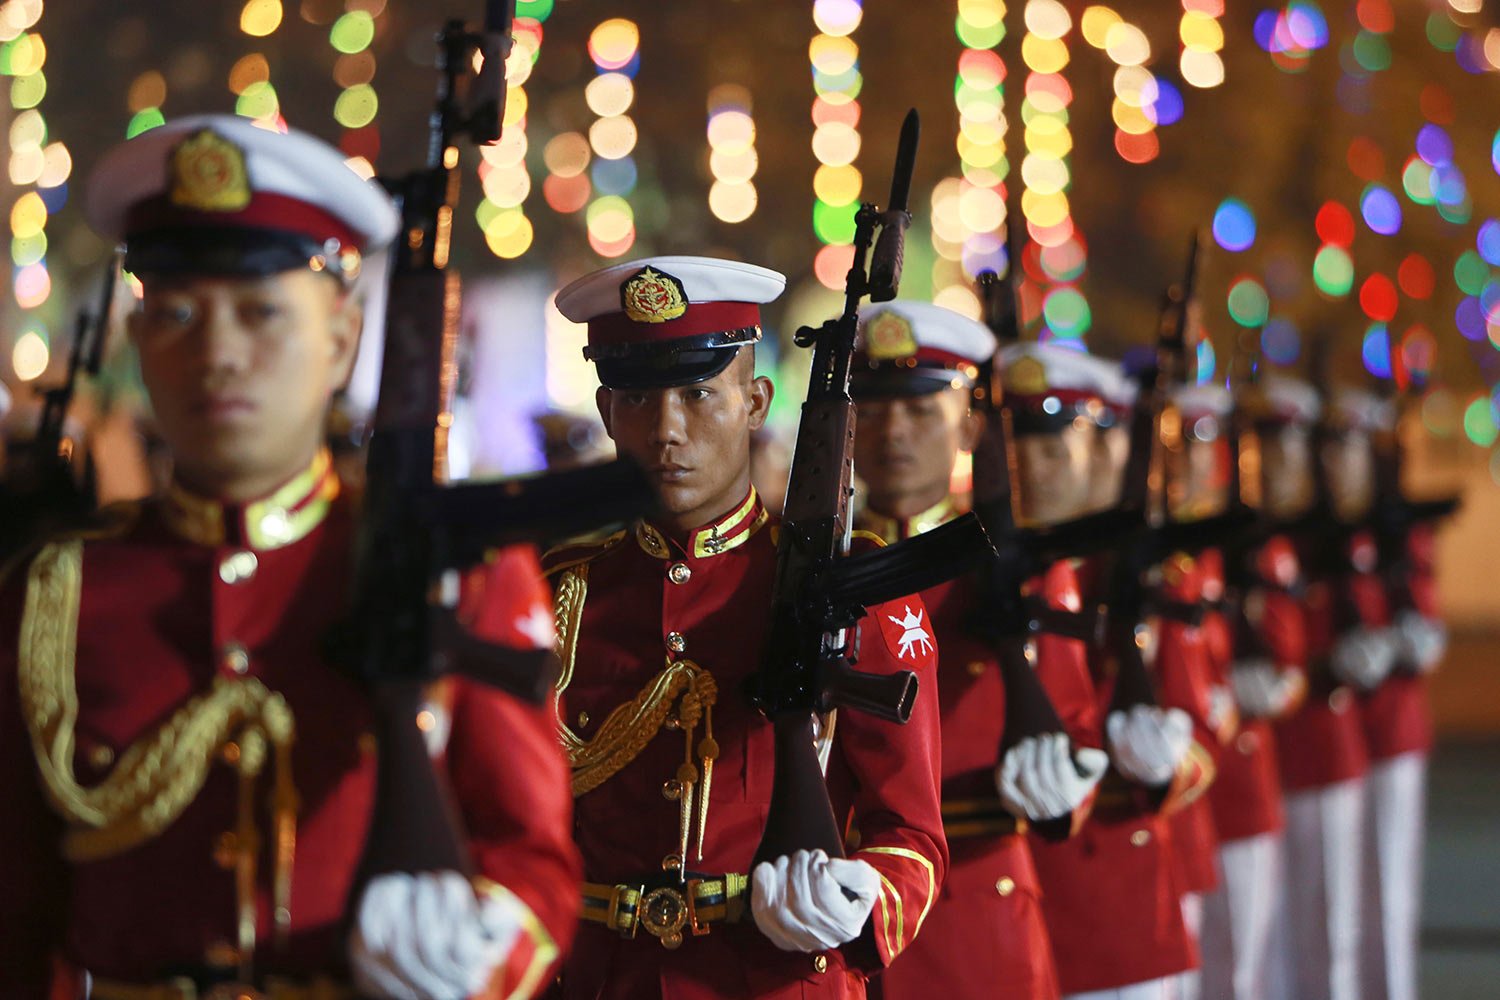  Members of an honor guard march during a ceremony to mark Myanmar's 76th anniversary of Union Day in Naypyitaw, Myanmar, Sunday, Feb. 12, 2023. (AP Photo/Aung Shine Oo) 